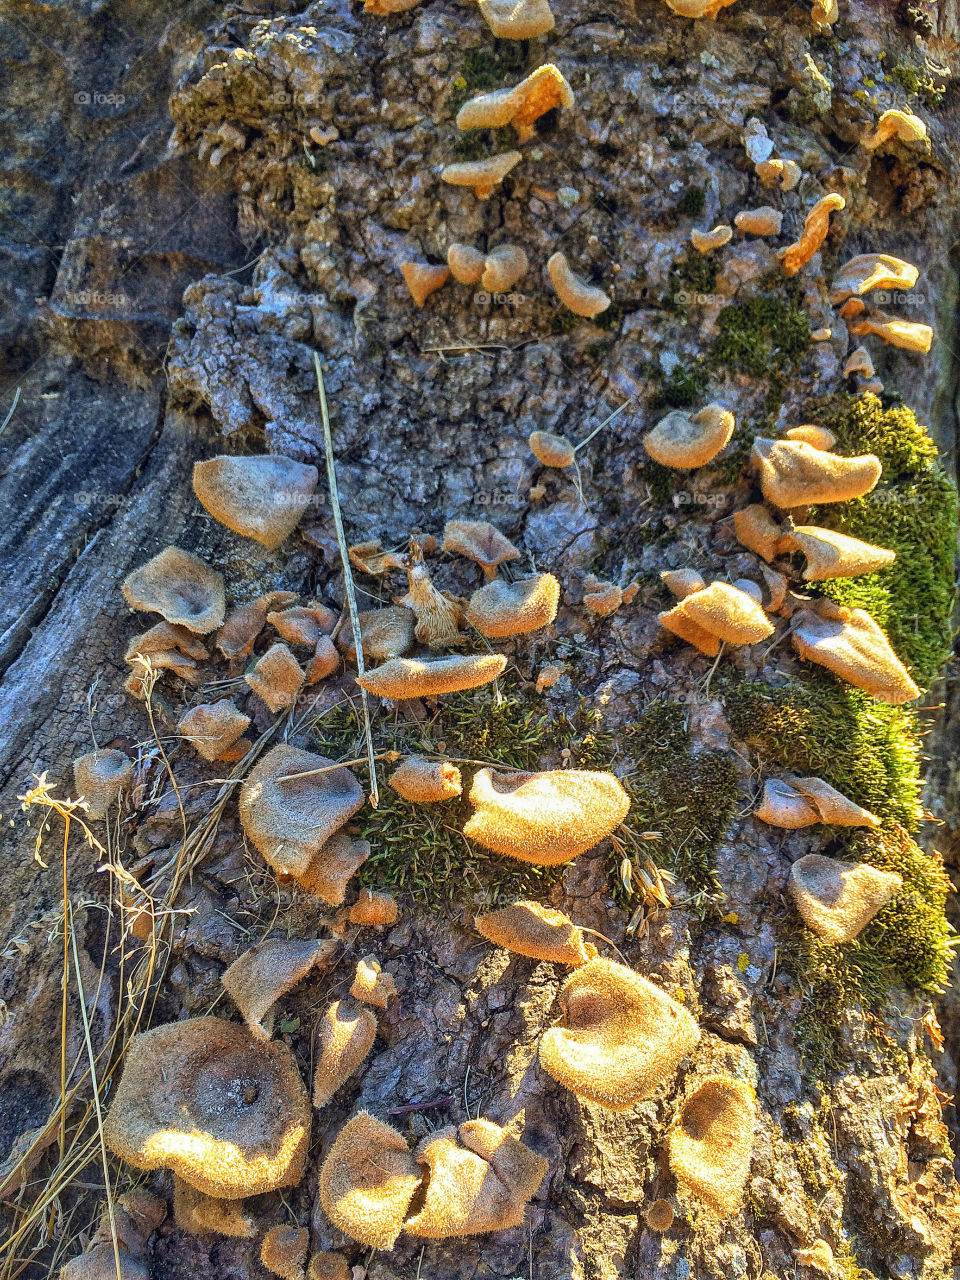 Just some fungus